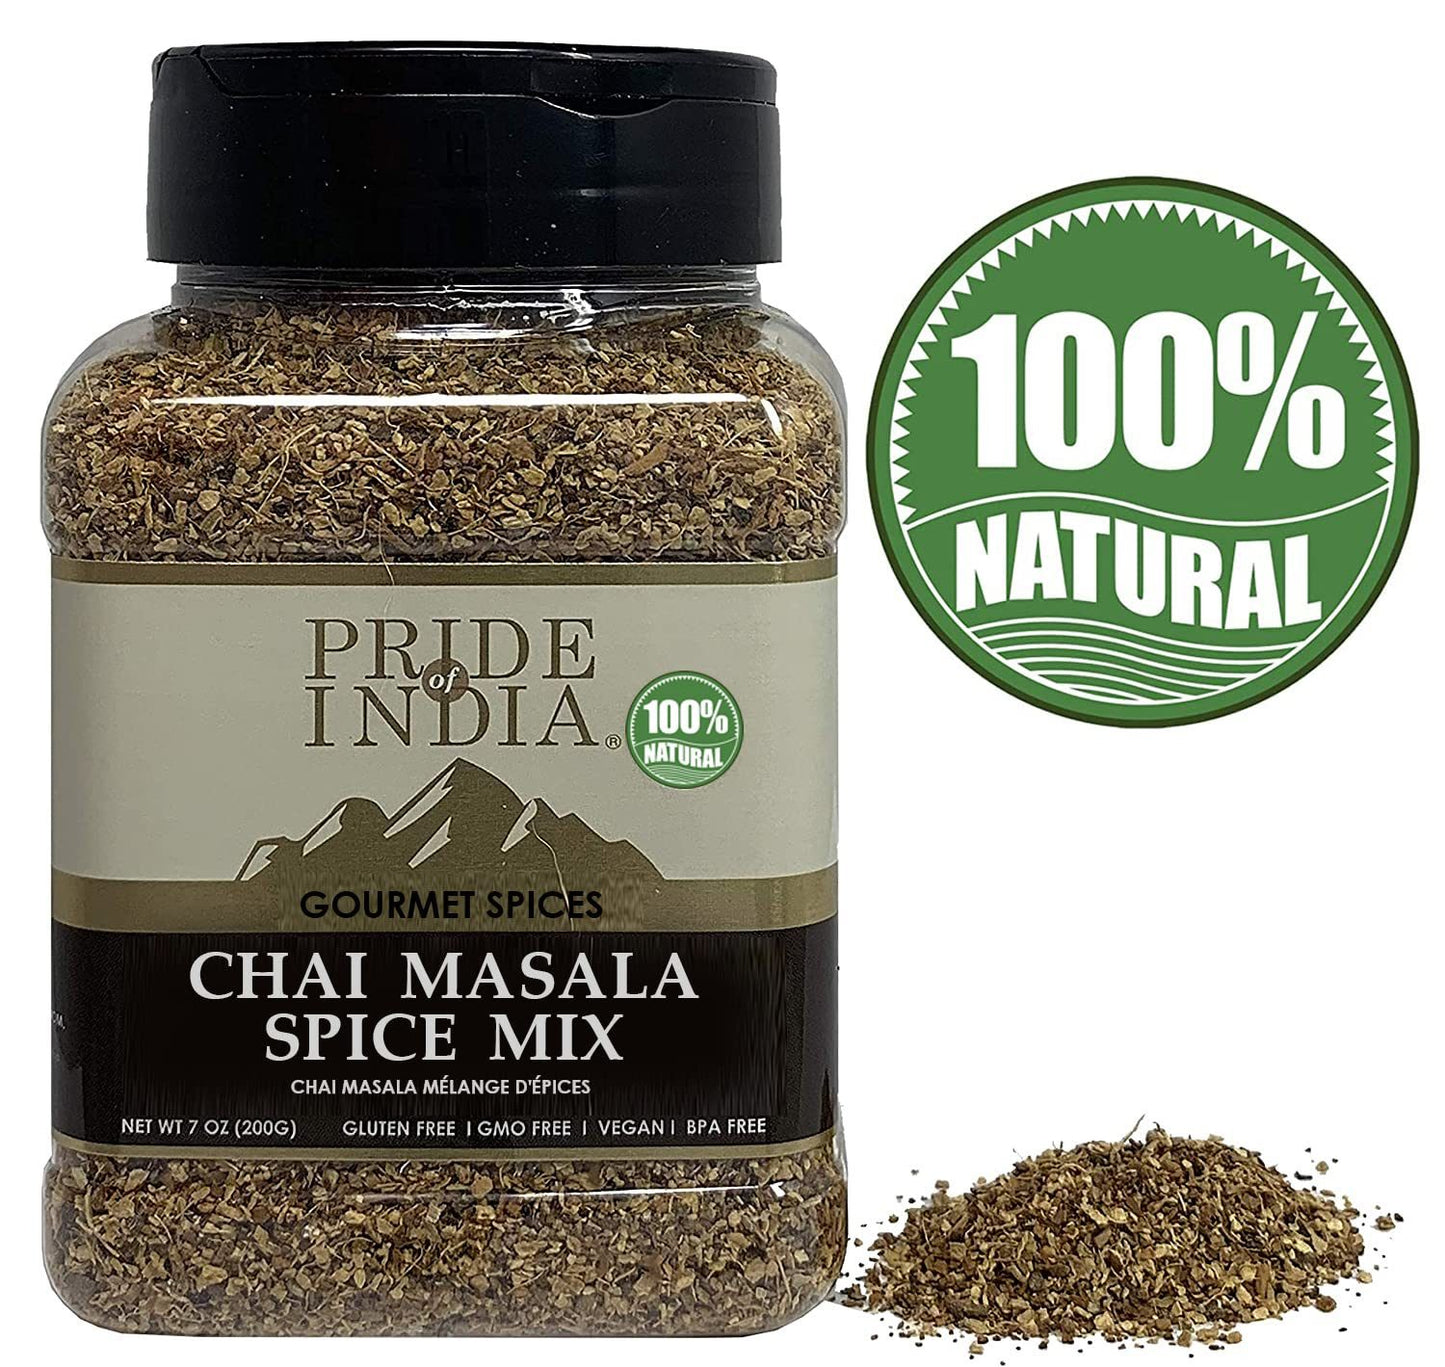 Pride of India – Chai Masala Mulling Spice Mix – Gourmet Spice Mix for Teas & Coffee – Caffeine Free – Authentic Mulling Spice Blend – Vegan & Gluten-Free - Easy to Store – 7oz. Medium Dual Sifter Jar